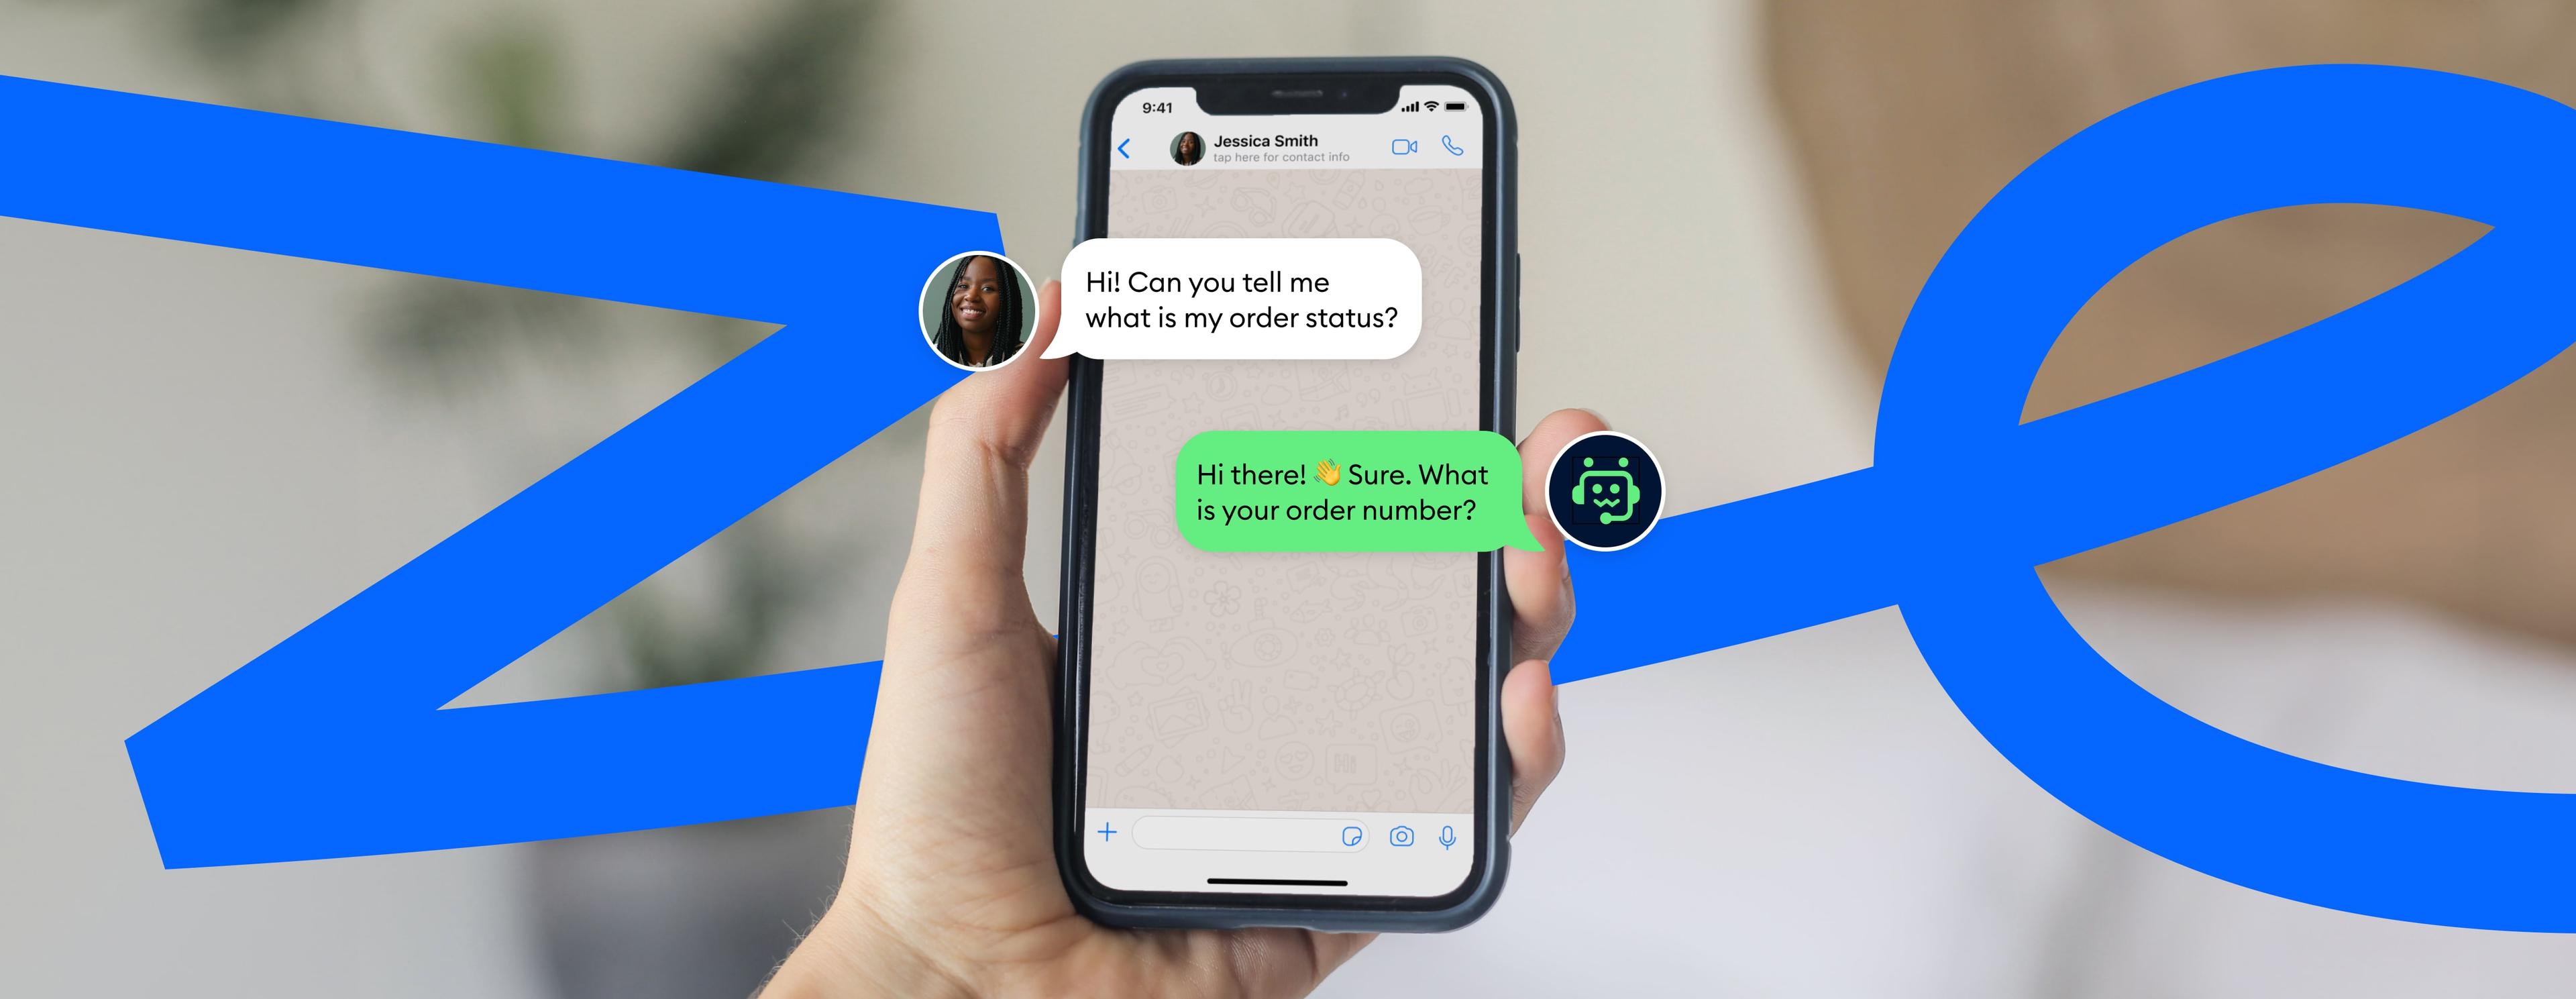 whatsapp chatbot tools cover image